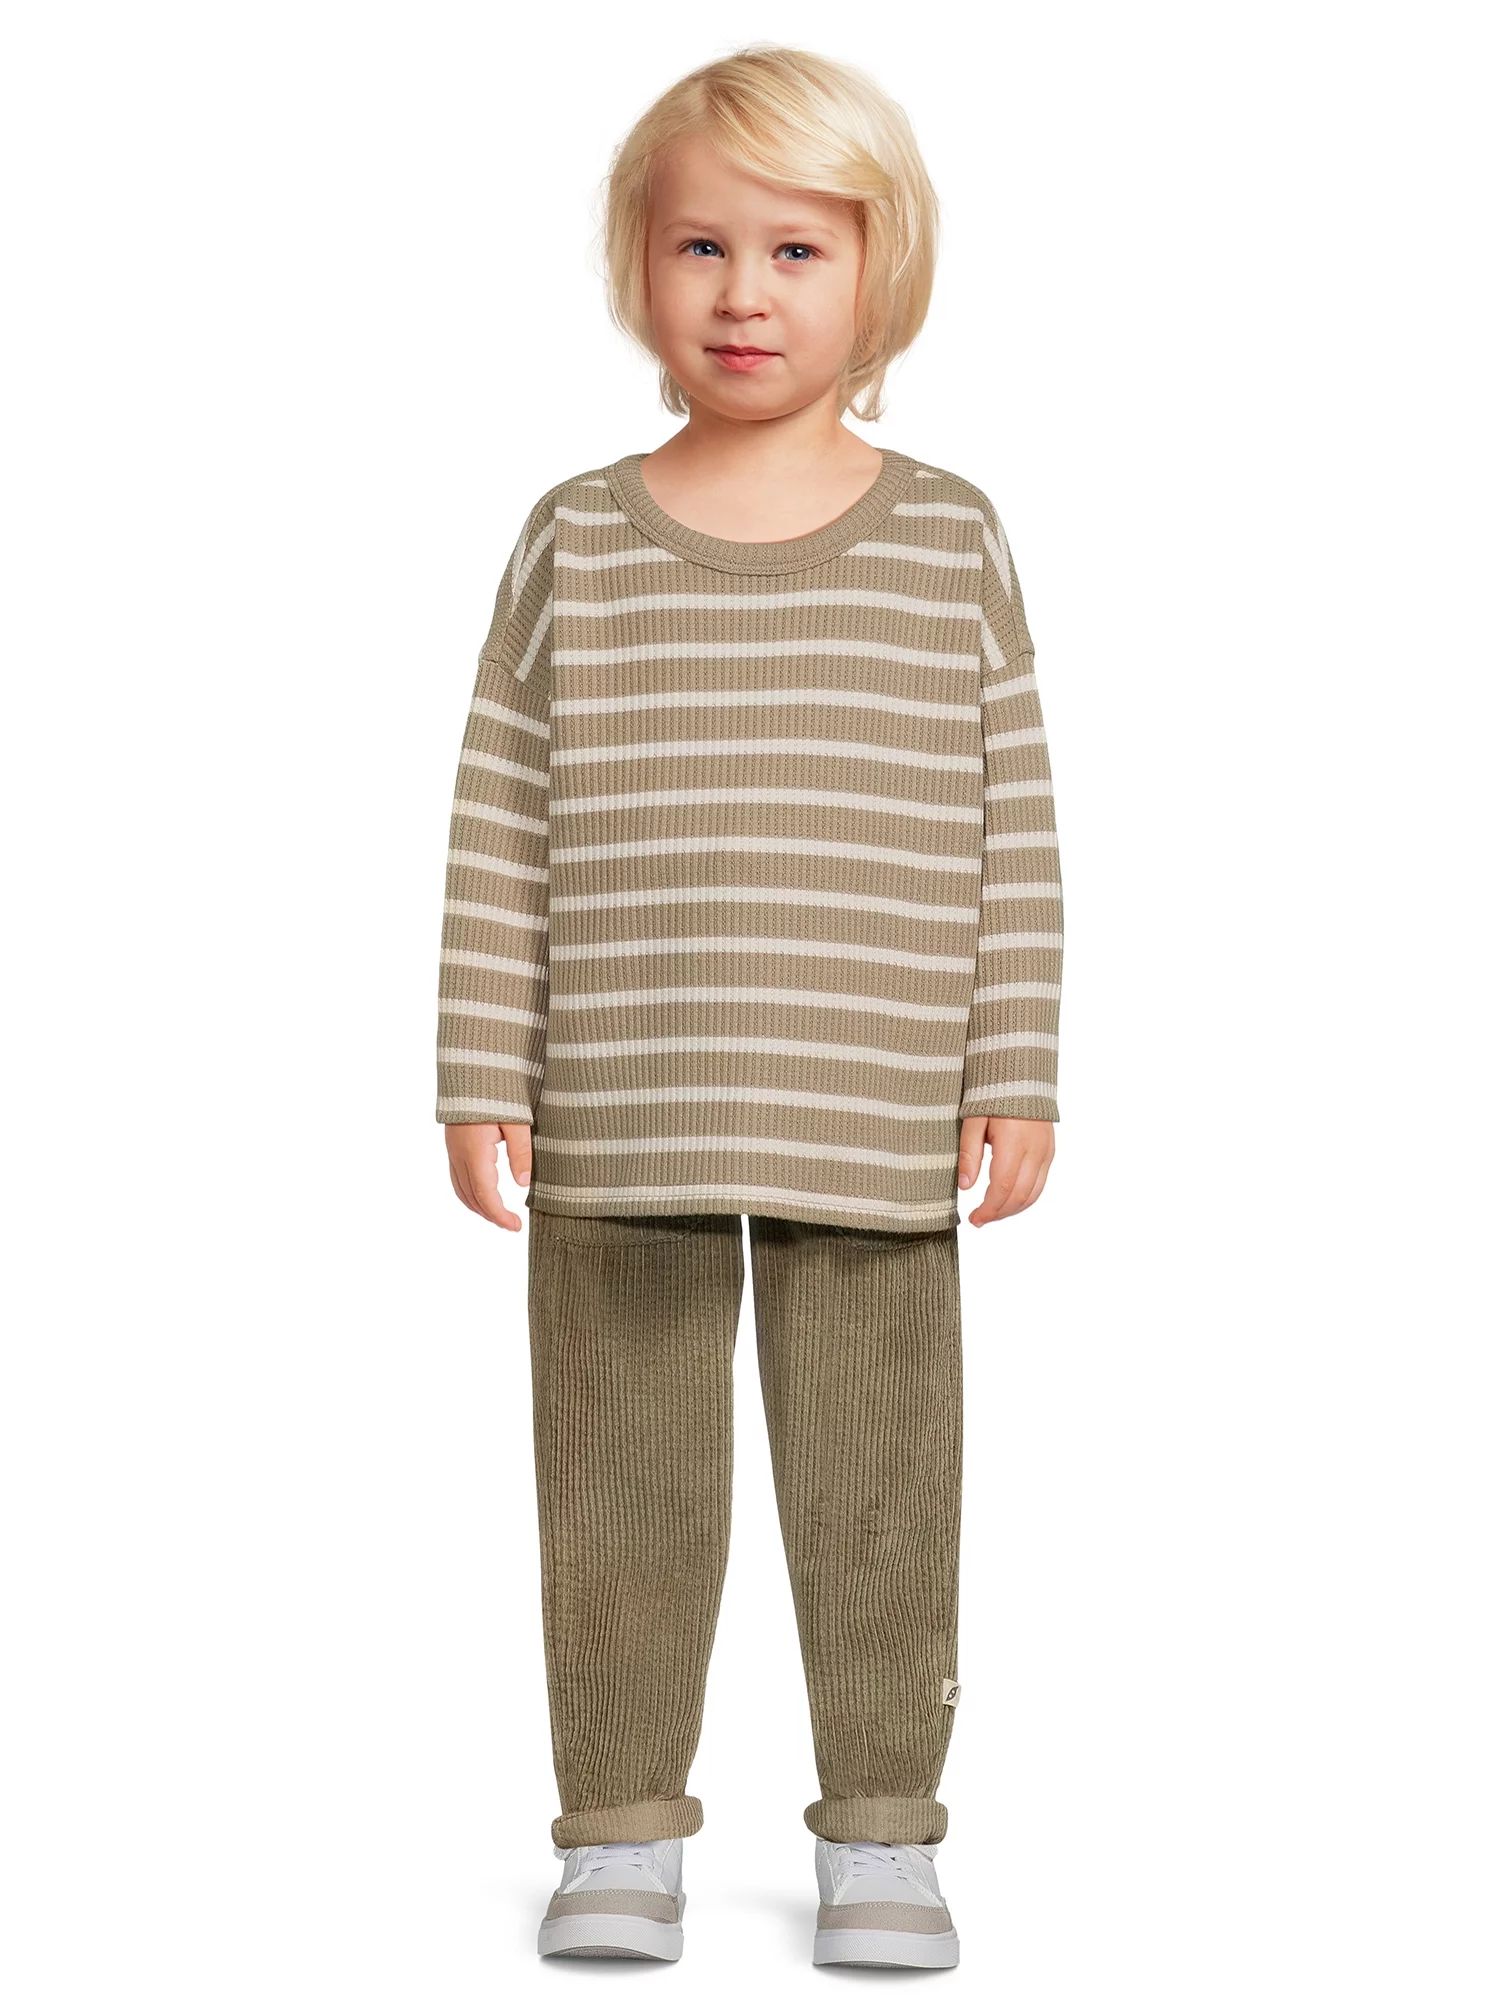 easy-peasy Toddler Boys Long Sleeve Waffle T-Shirt and Pants Outfit Set, 2-Piece, Sizes 12M-5T | Walmart (US)